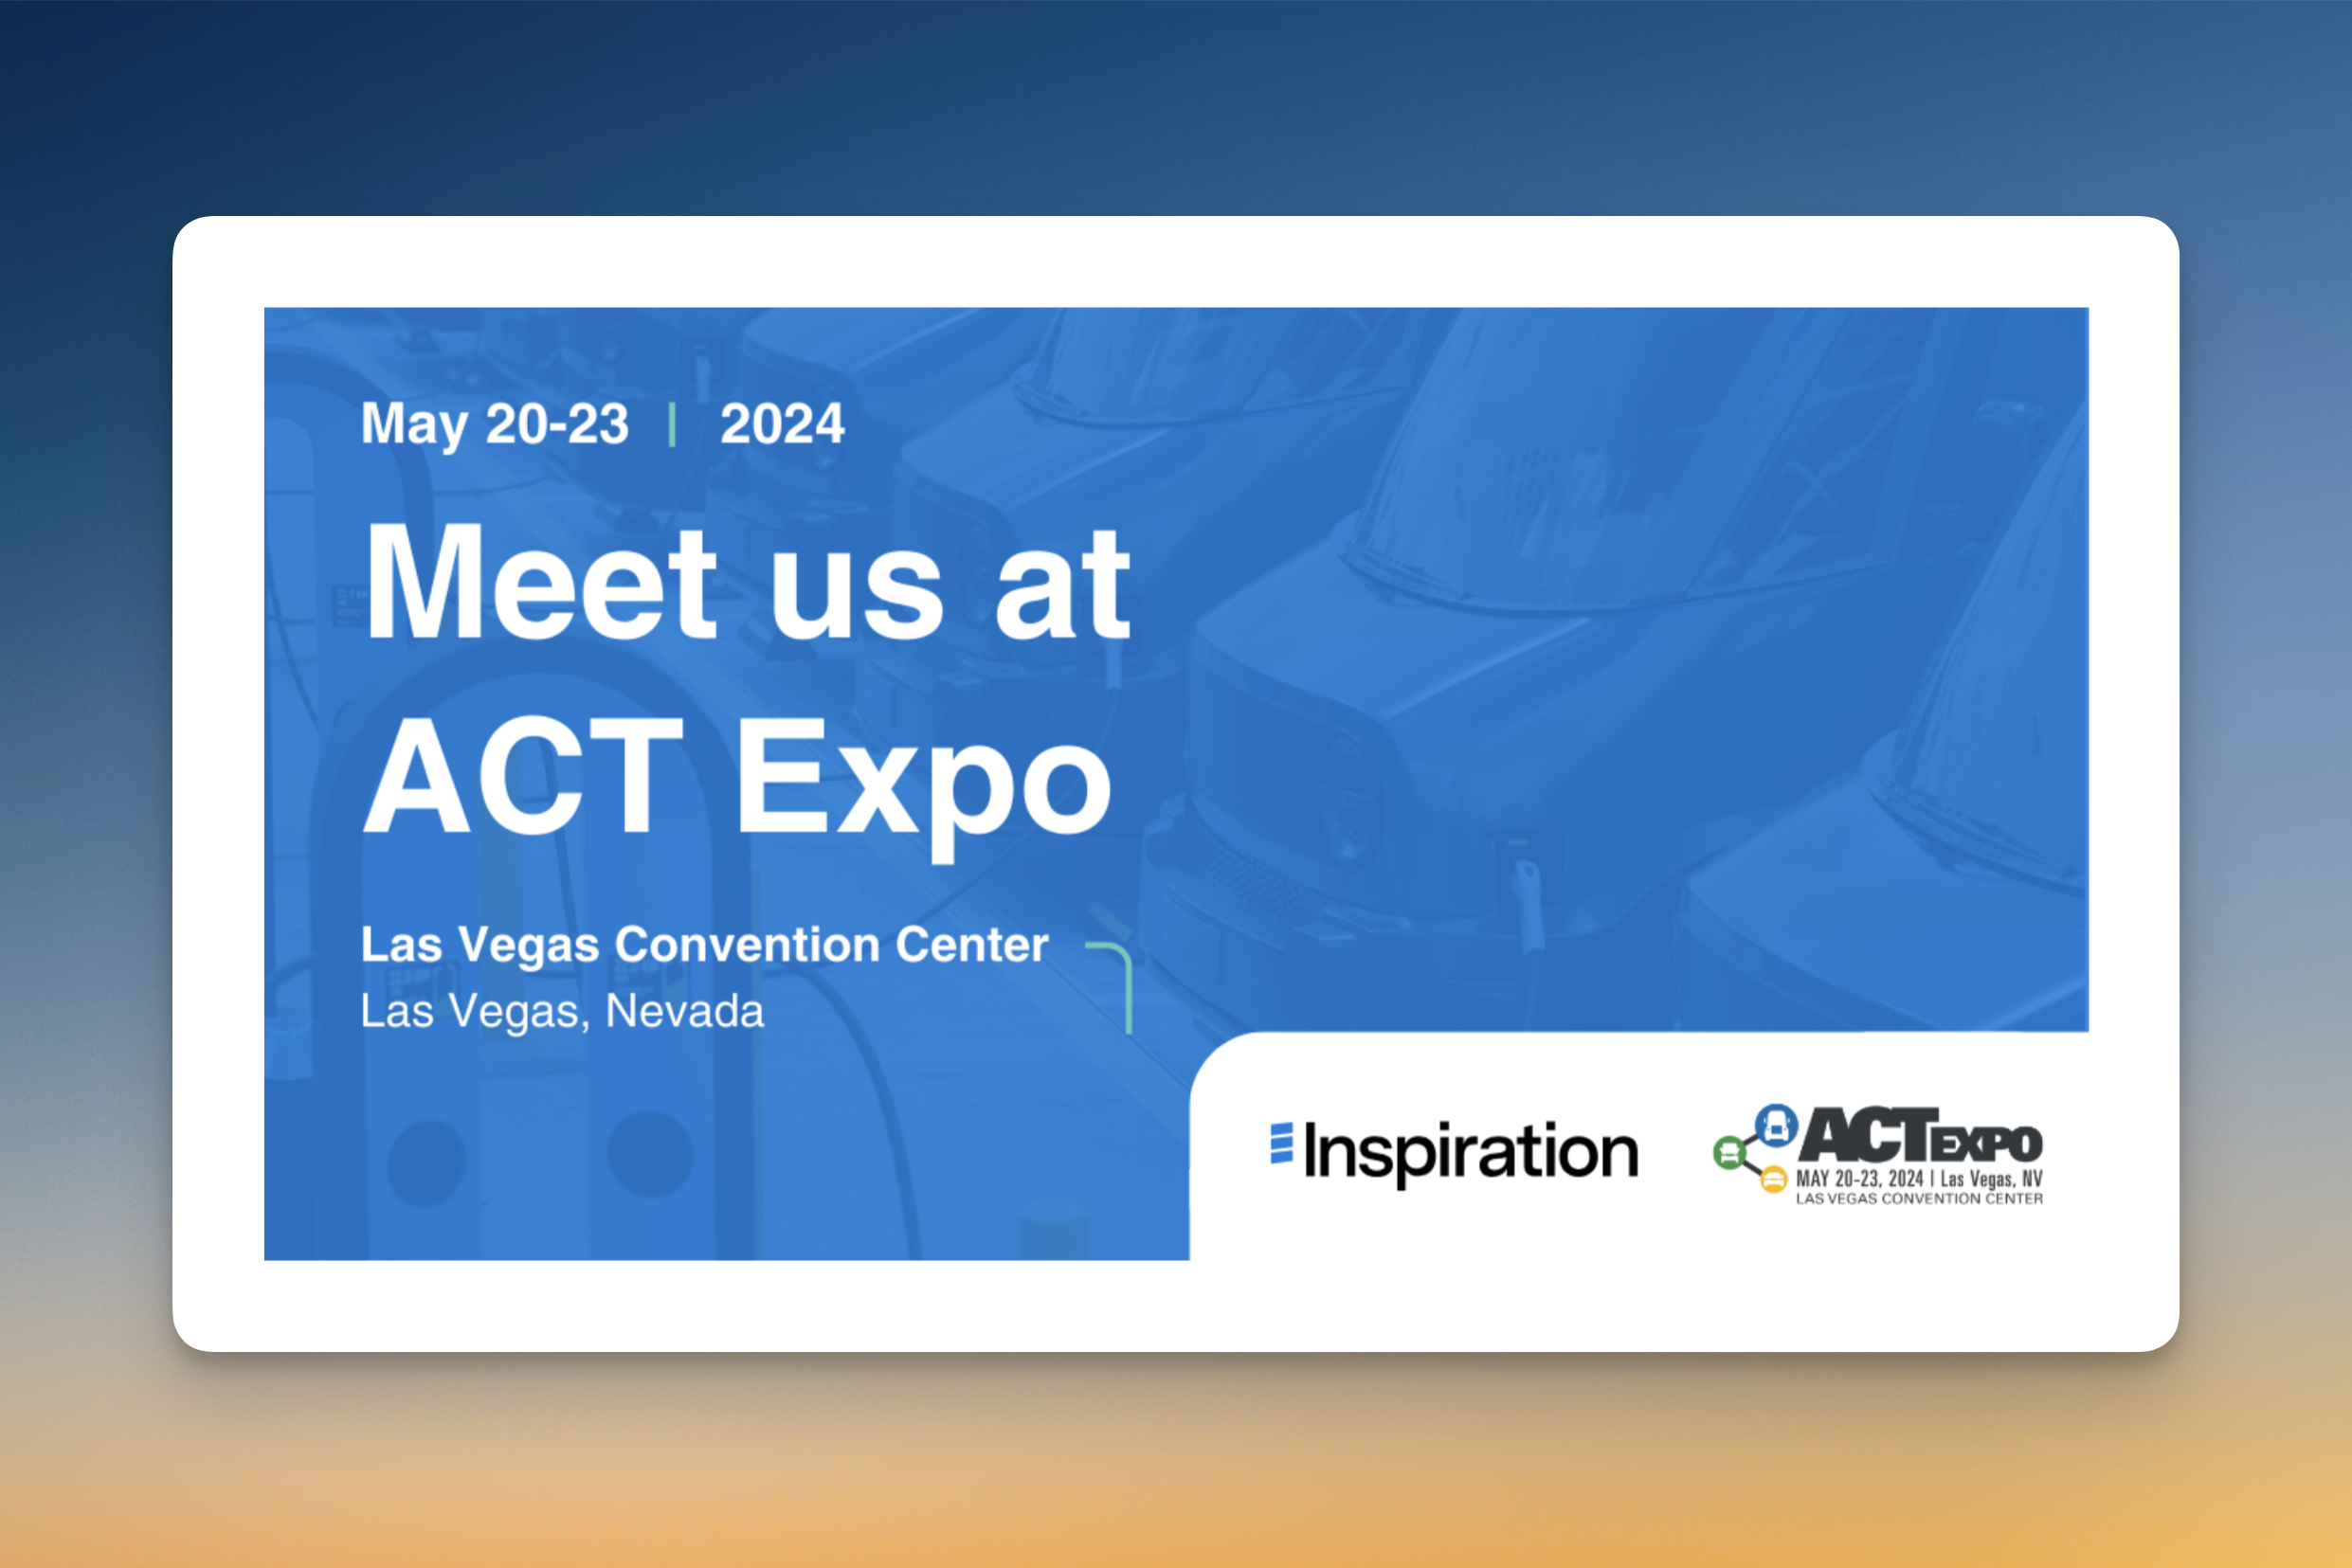 Advertisement for ACT Expo event with the message 'Meet us at ACT Expo' for dates May 20-23, 2024, at the Las Vegas Convention Center, Las Vegas, Nevada. Background shows a faded blue overlay on vehicles.